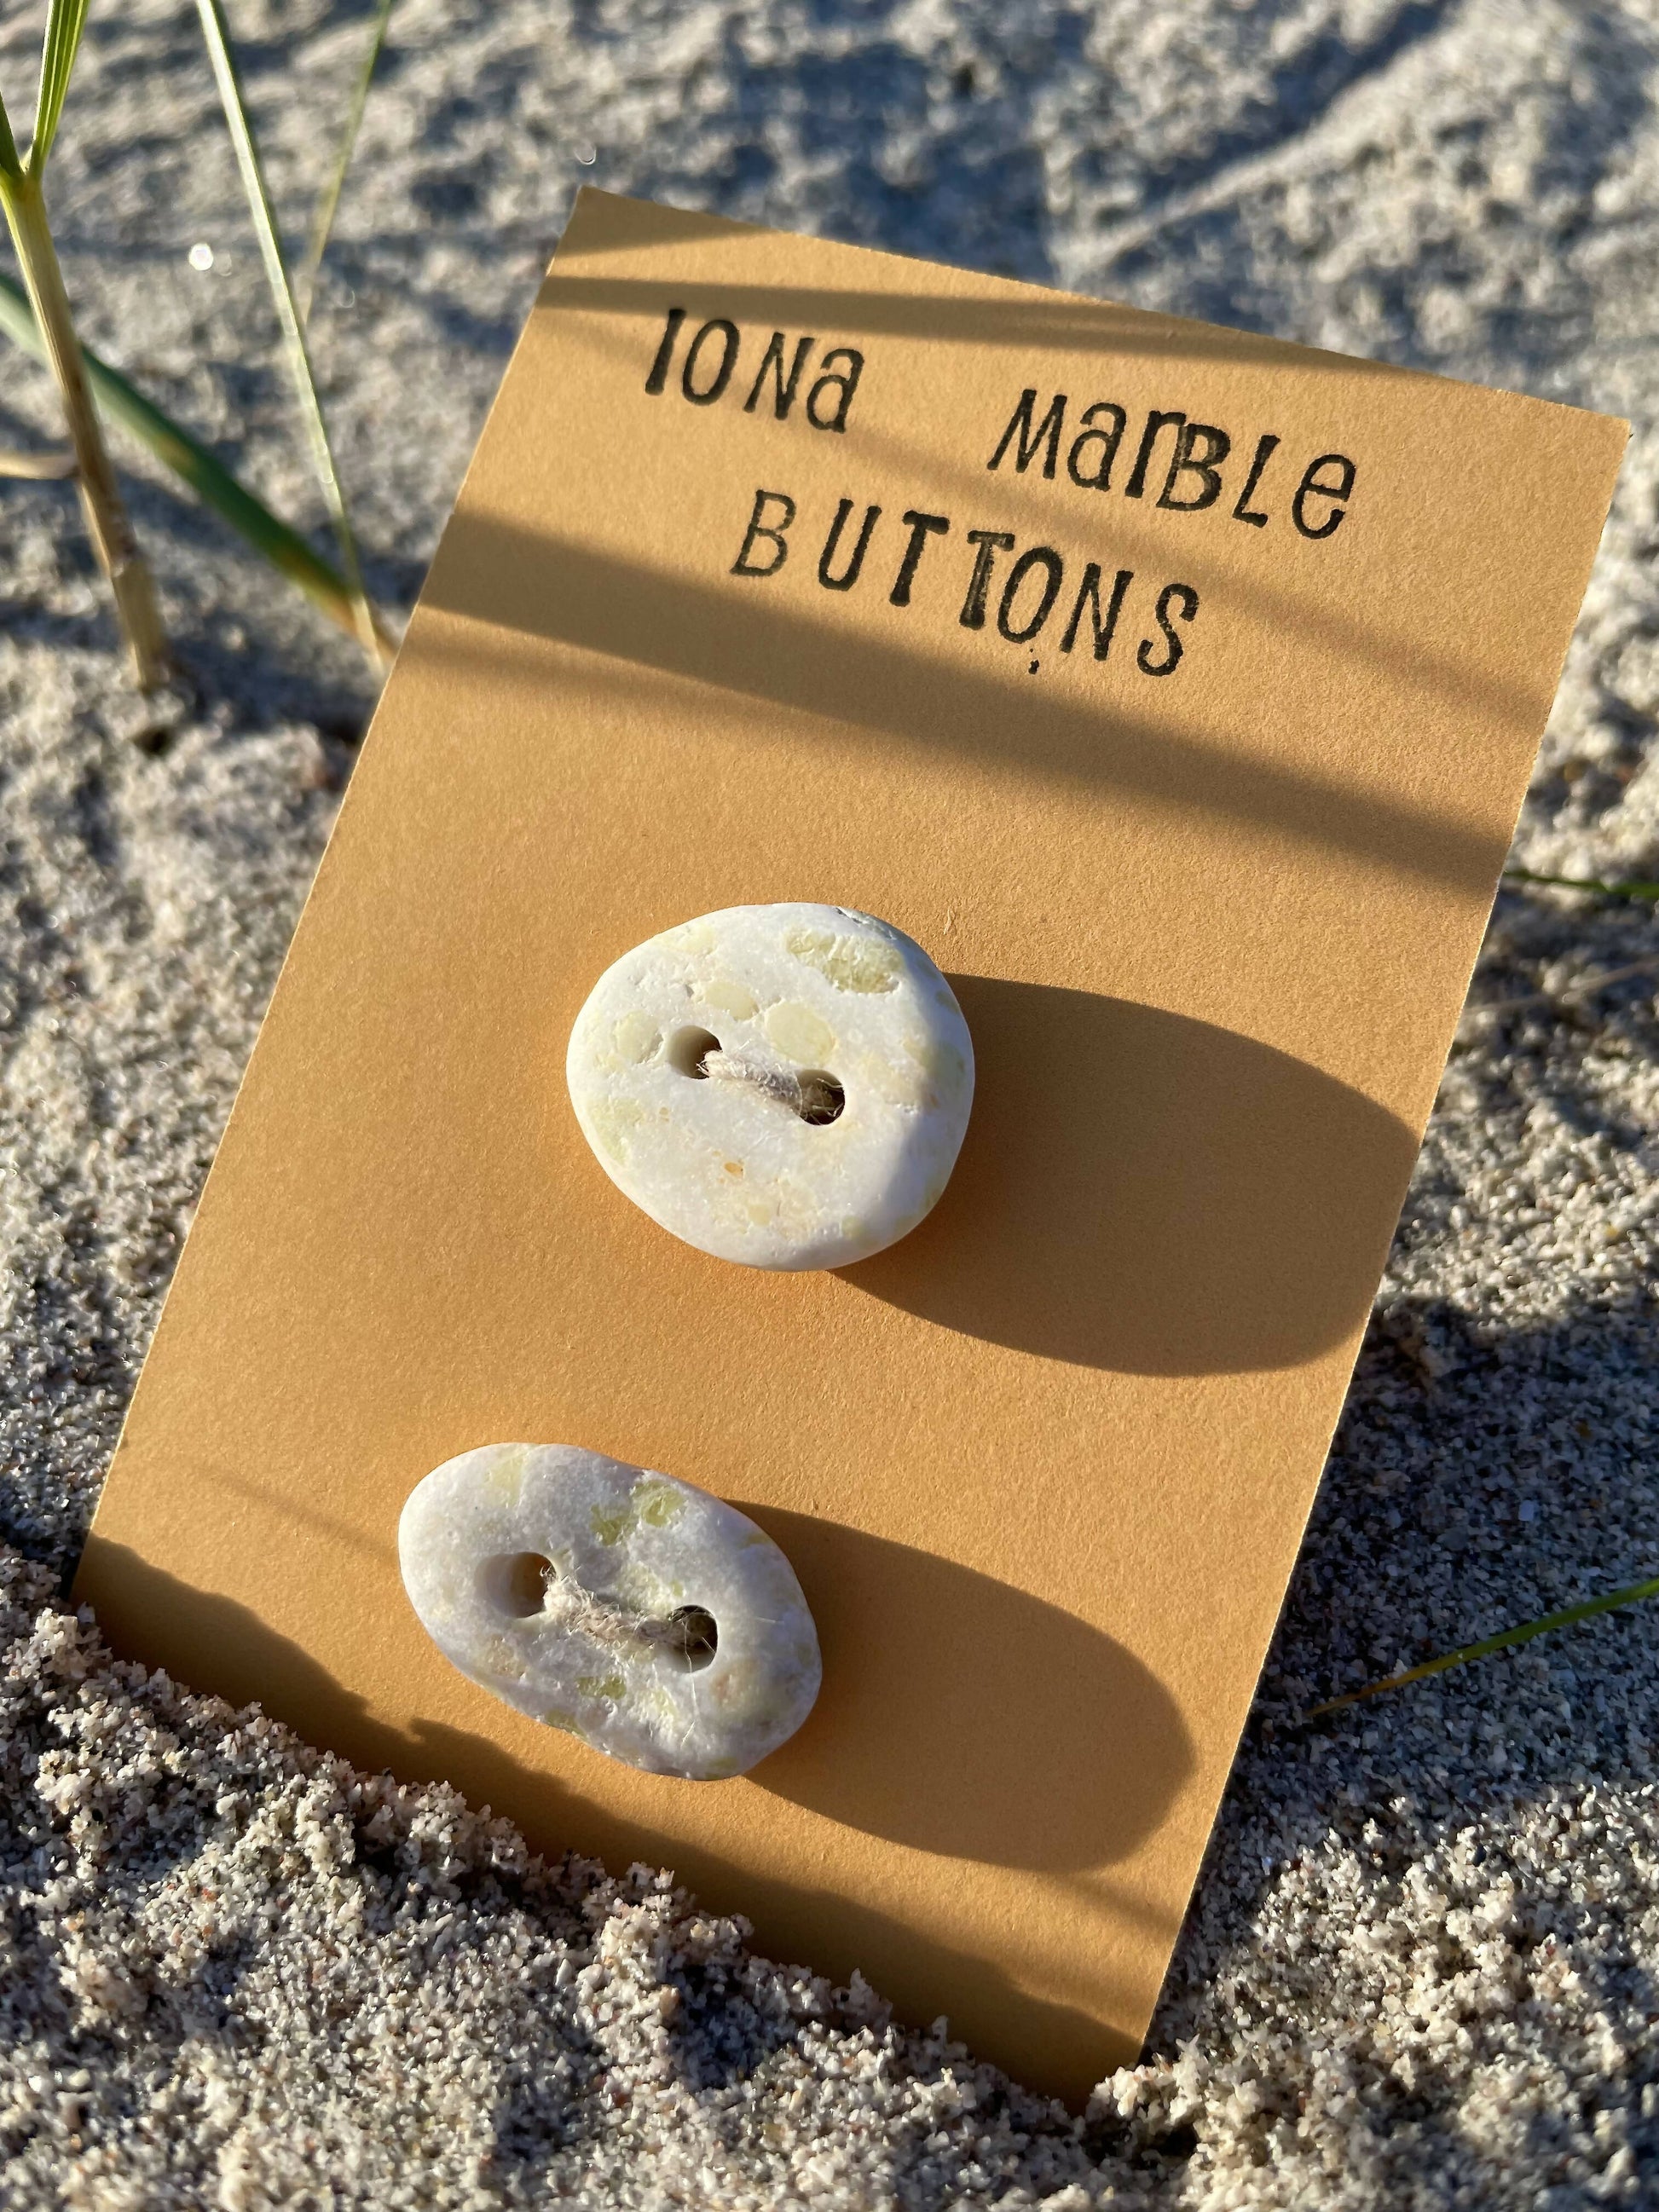 Iona Marble Buttons - 11